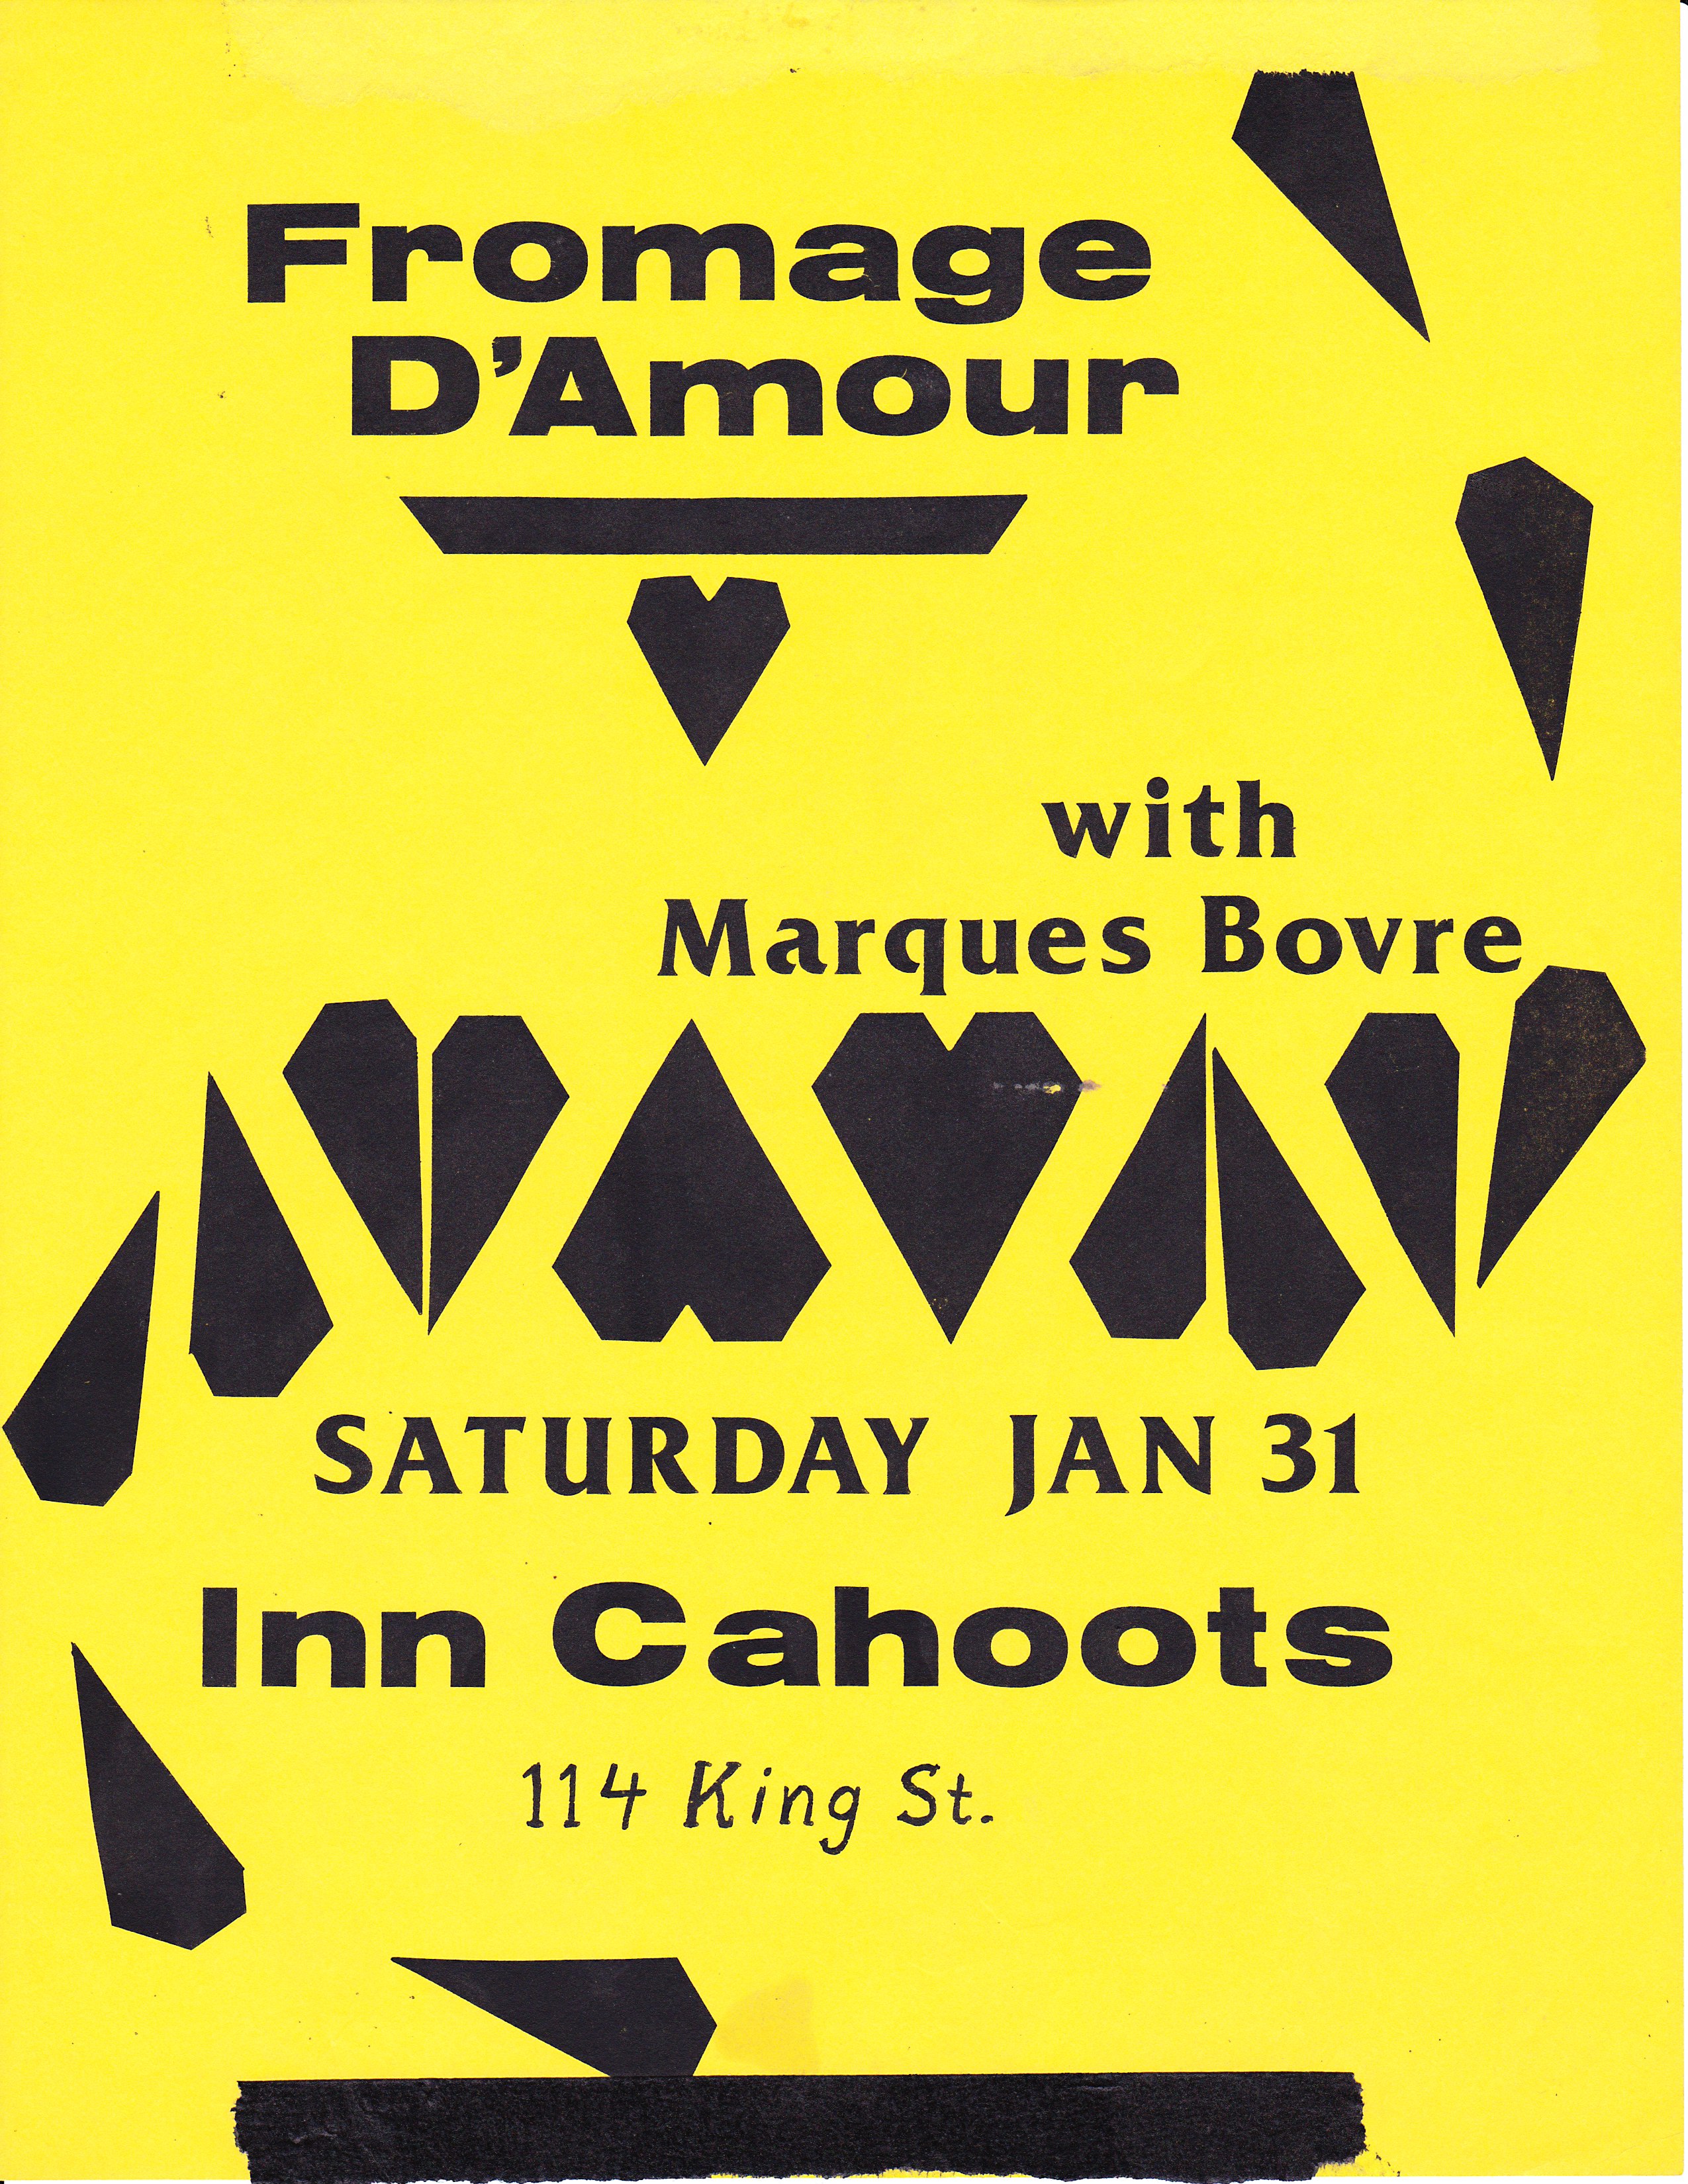 Marques Bovre opening for Fromage D'Amour, January 31, 1987